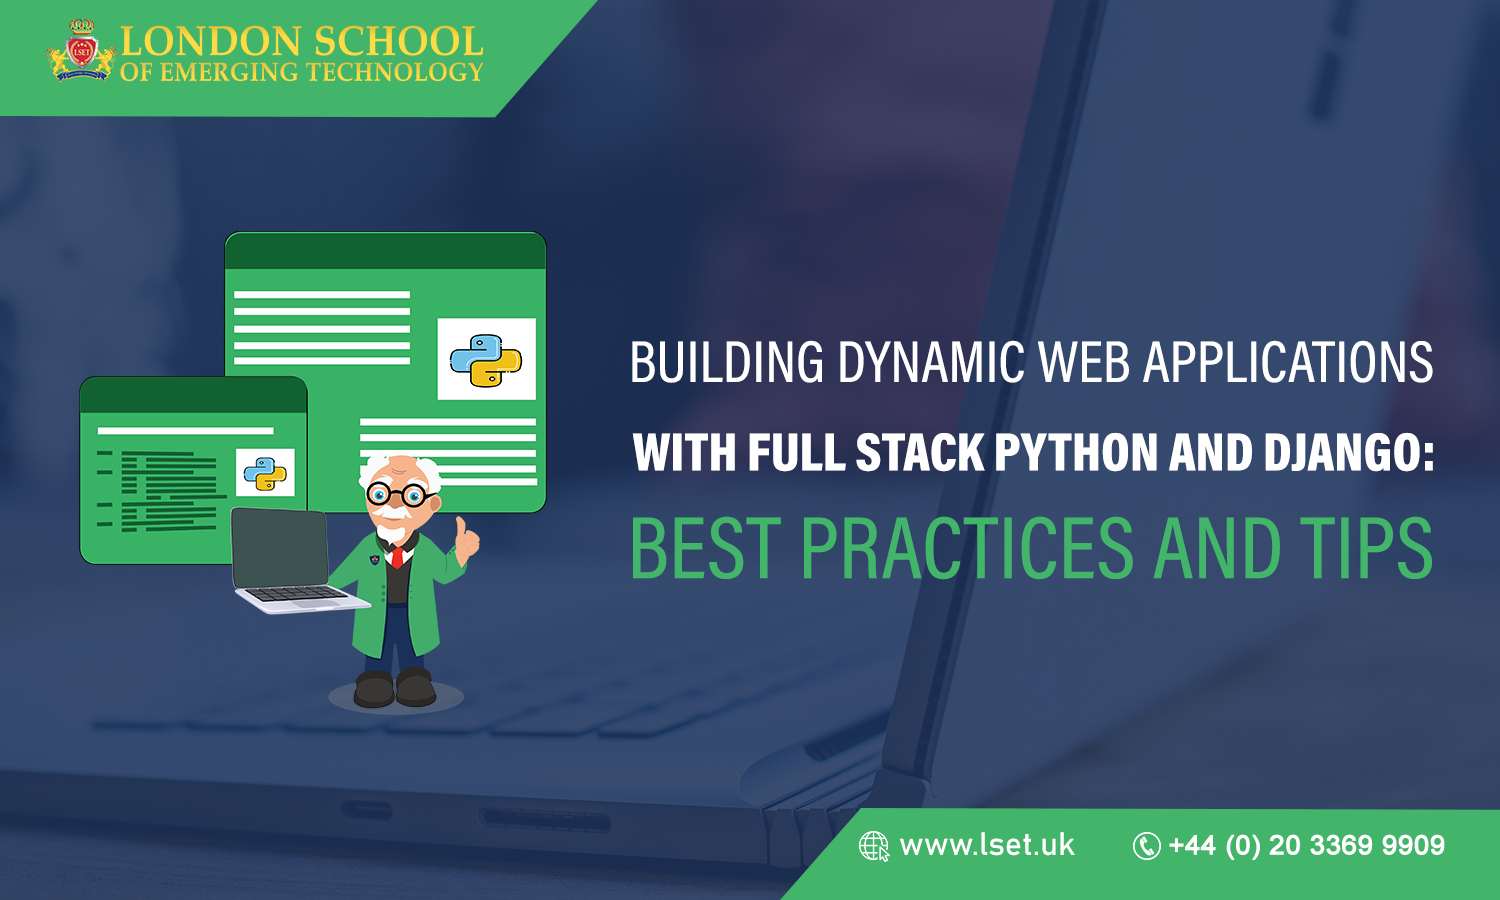 Building Dynamic Web Applications with Full Stack Python and Django Best Practices and Tips